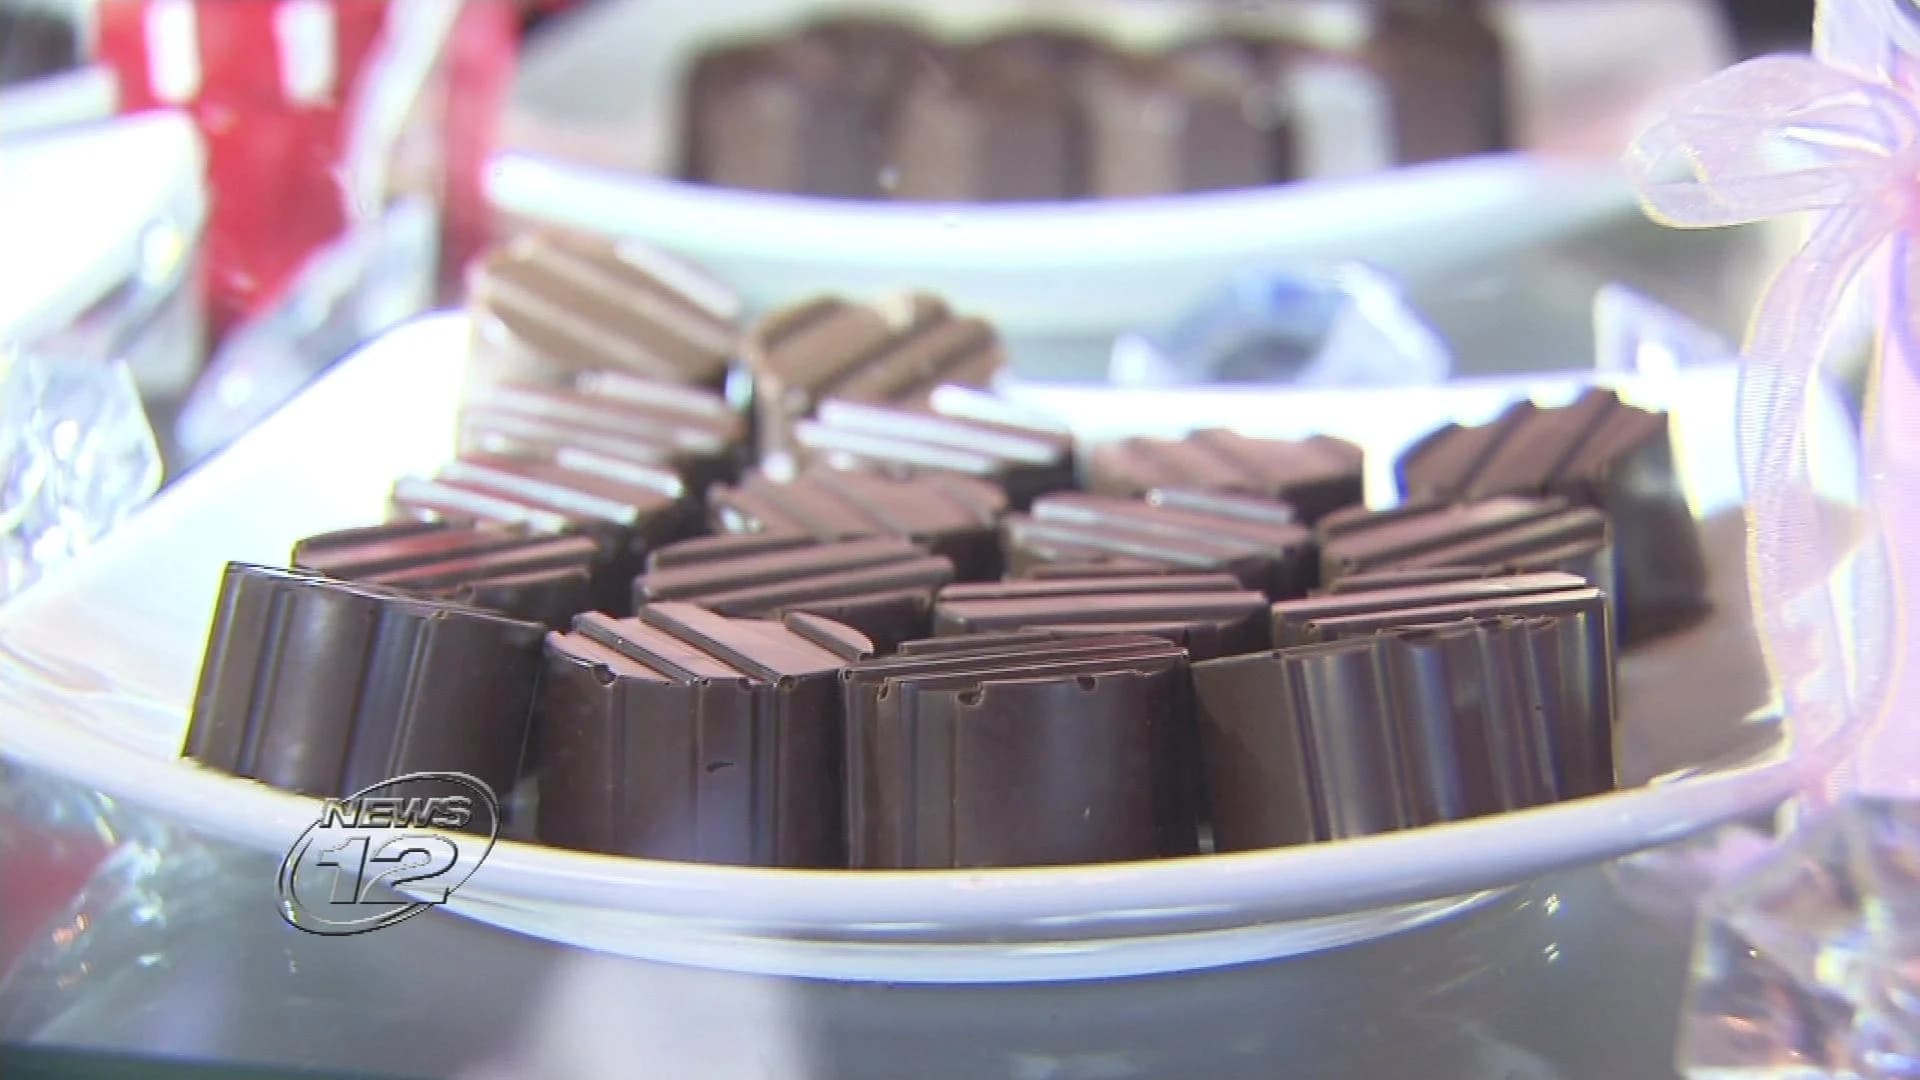 Tuckahoe chocolate cafe serves up Mother's Day treats